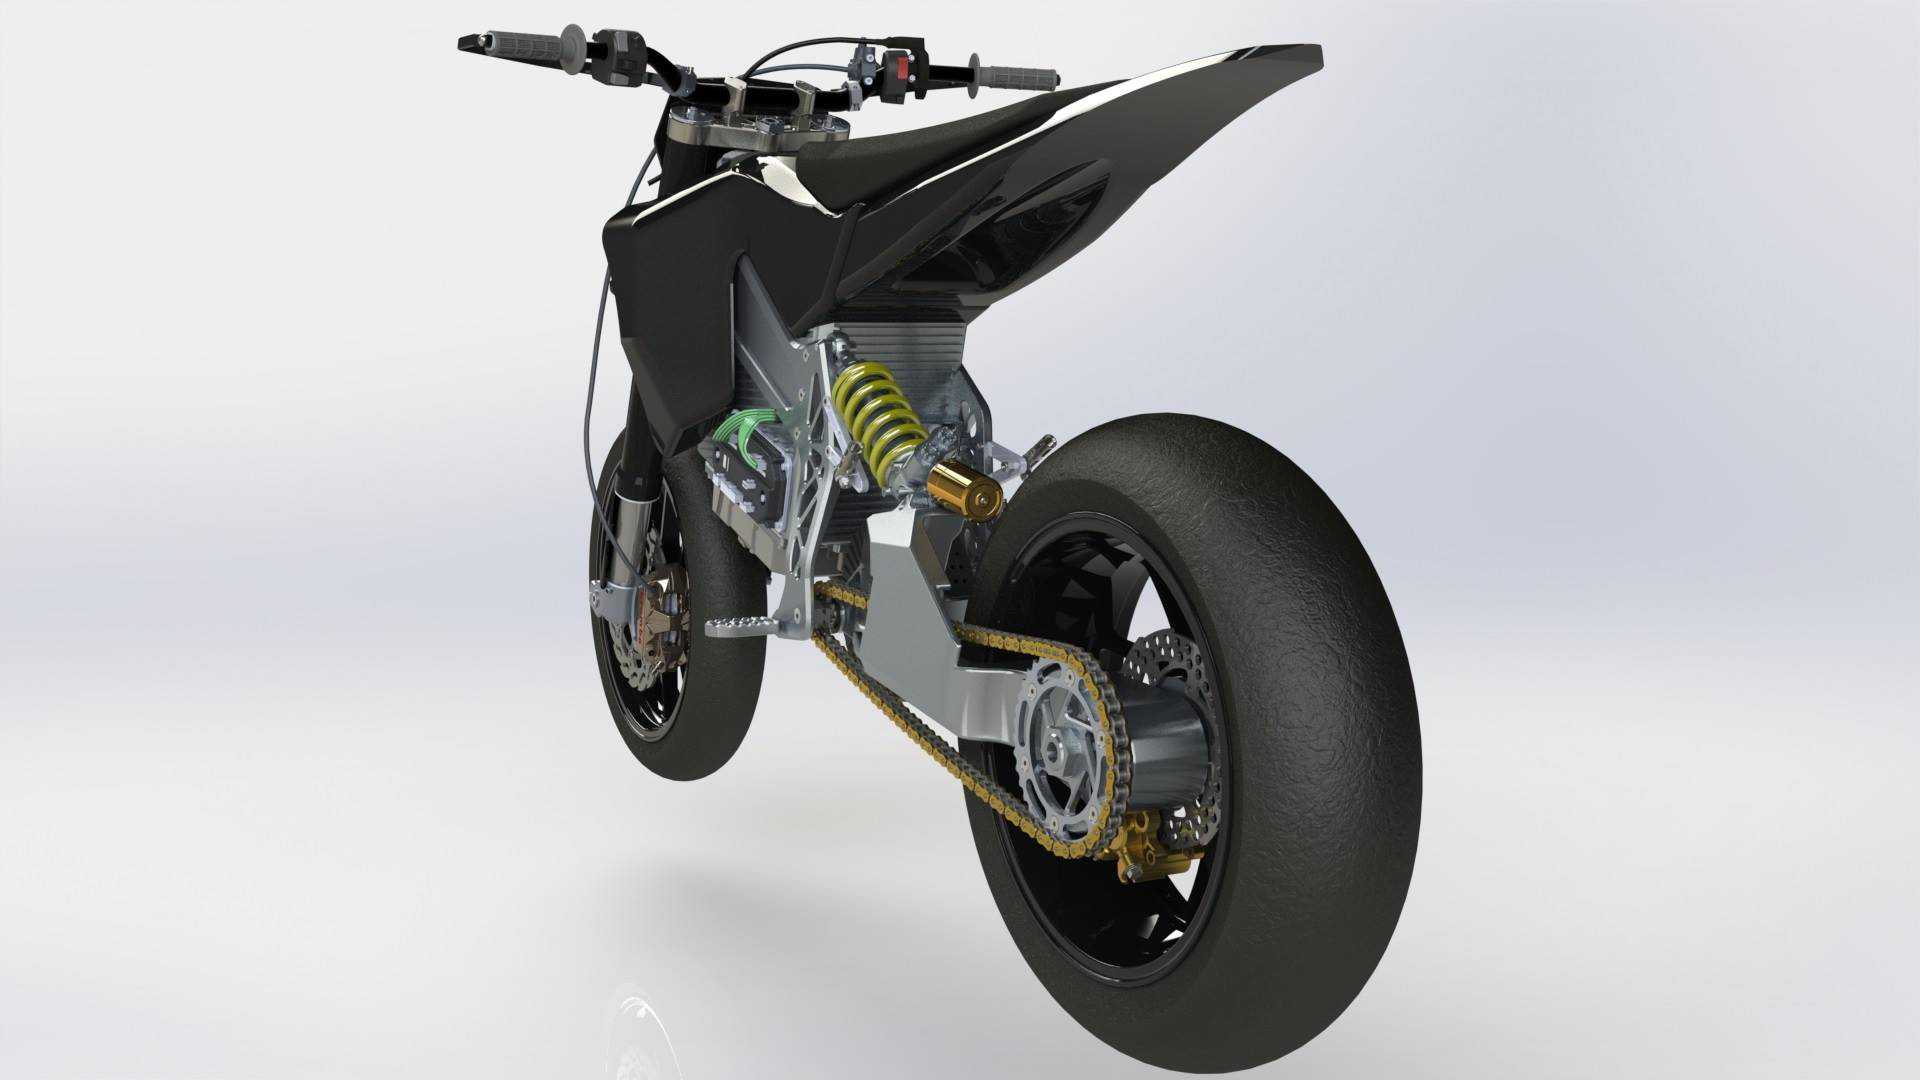 Liion is an electric supermoto from Axiis